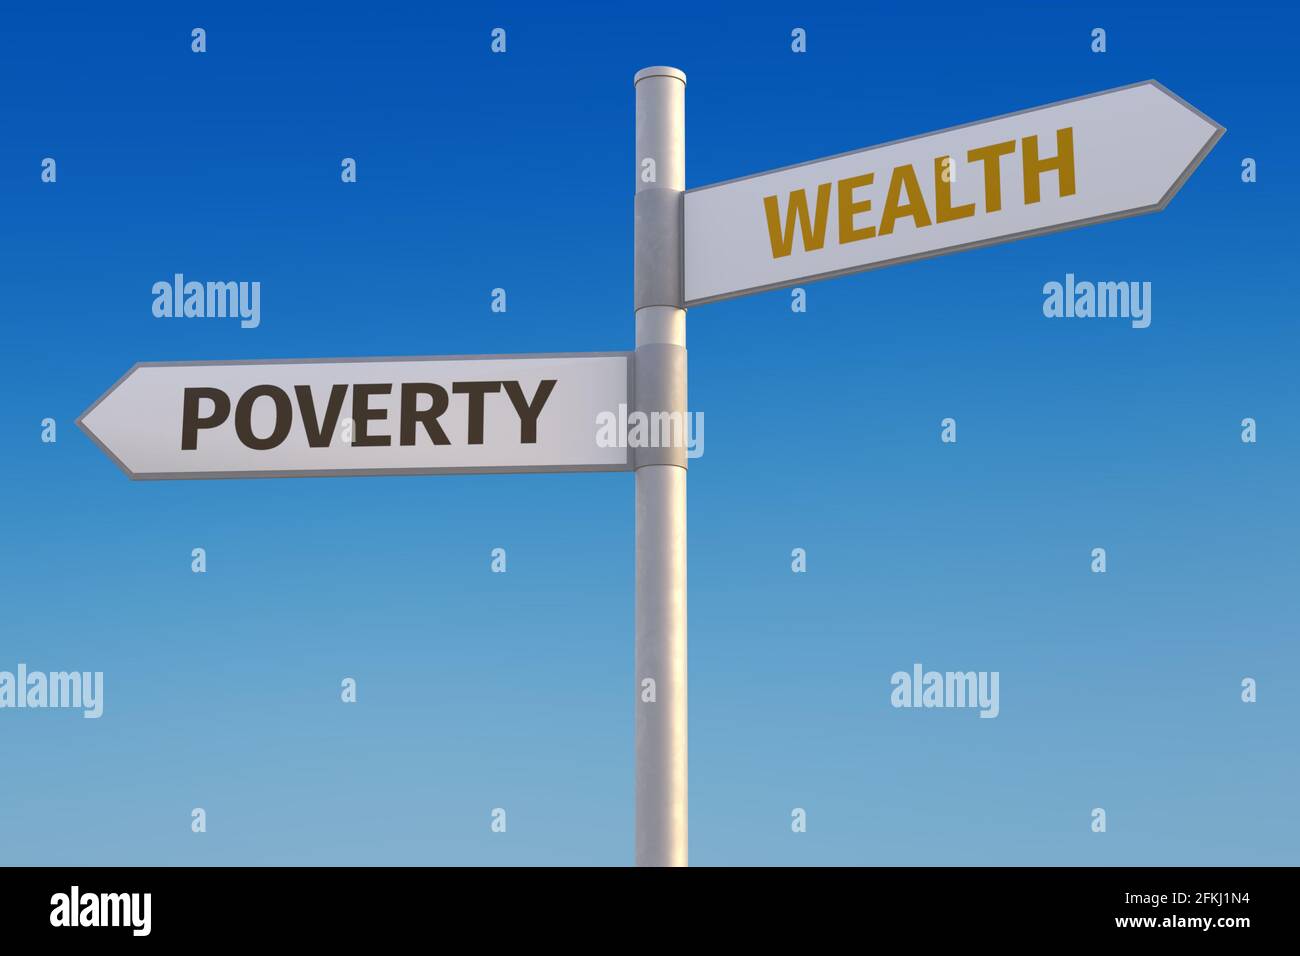 Poverty vs. Wealth concept. Two street signs pointing into opposite directions with the words poverty and wealth. Stock Photo